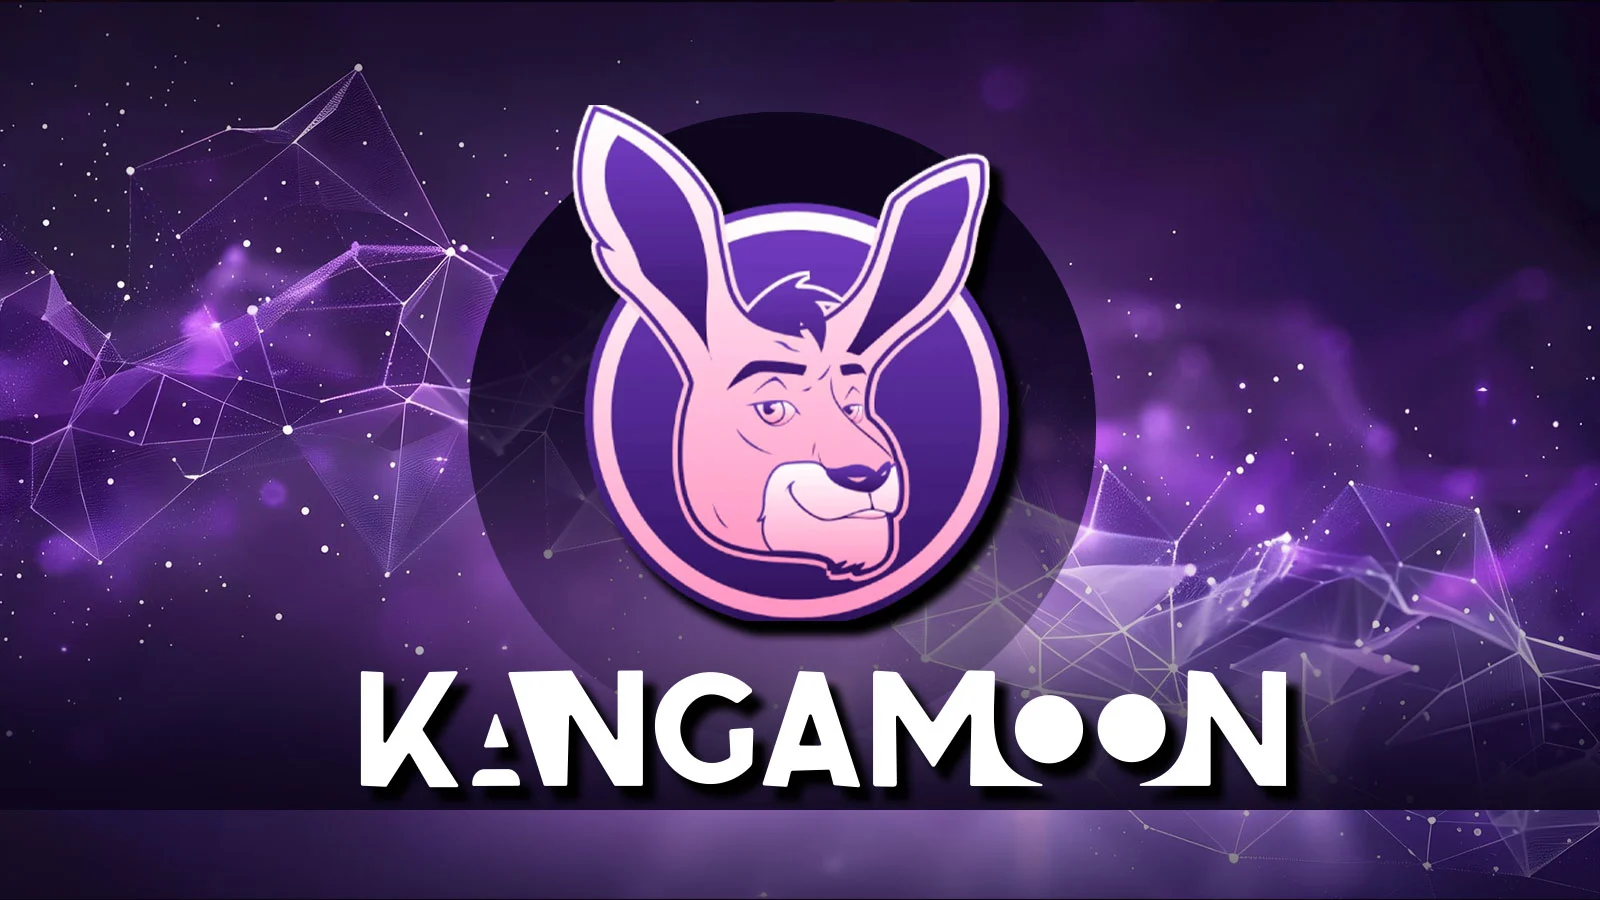 Moonbag Presale Exceeds $3 Million, Projecting 10x Growth By 2024, While Kangamoon And Algorand Face Uncertain Prospects = The Bit Journal